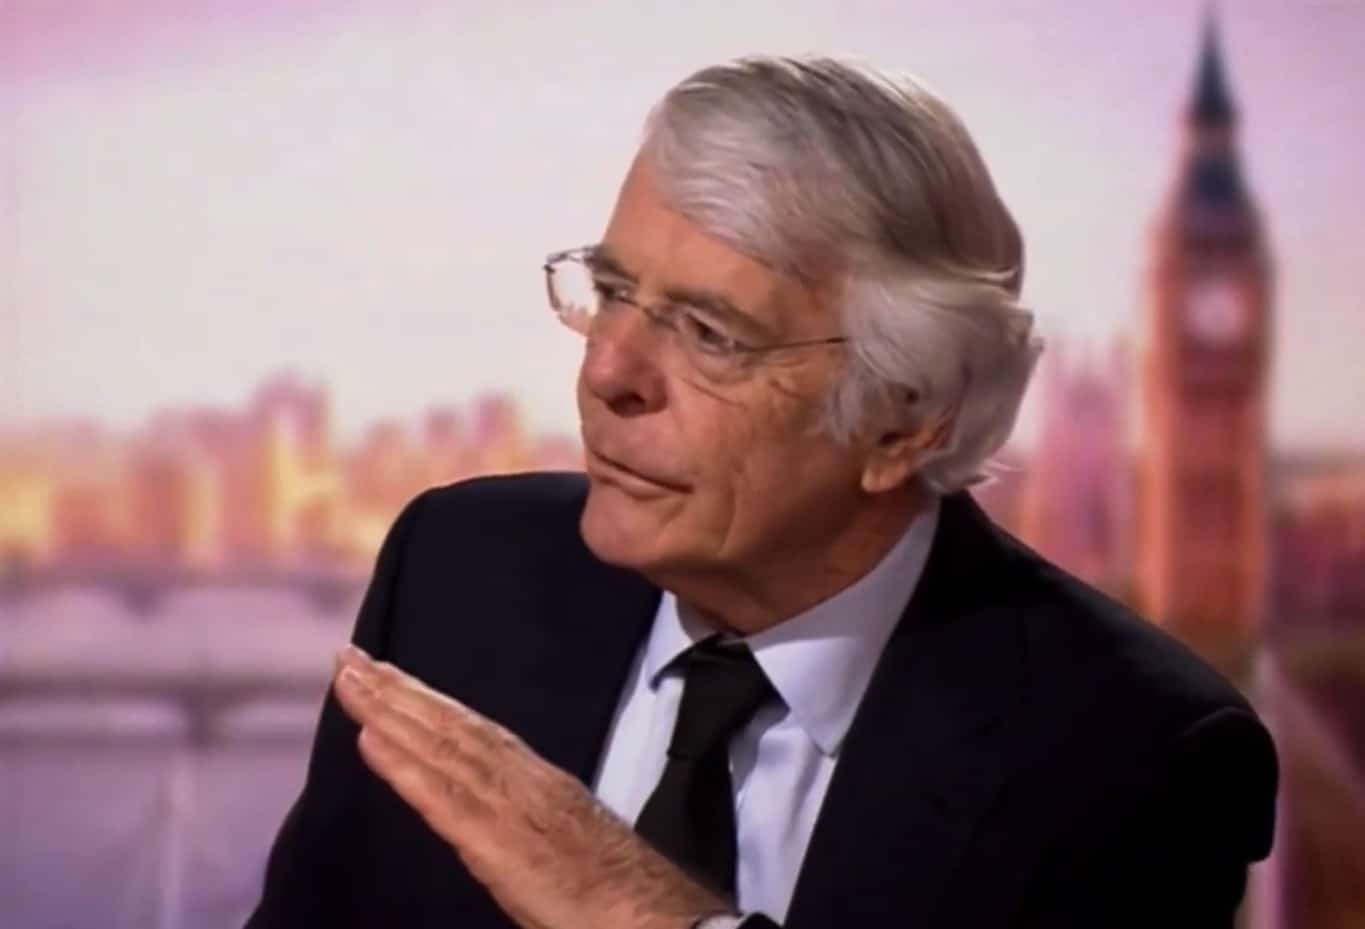 Watch: John Major says cabinet must share blame for Government ‘law-breaking’